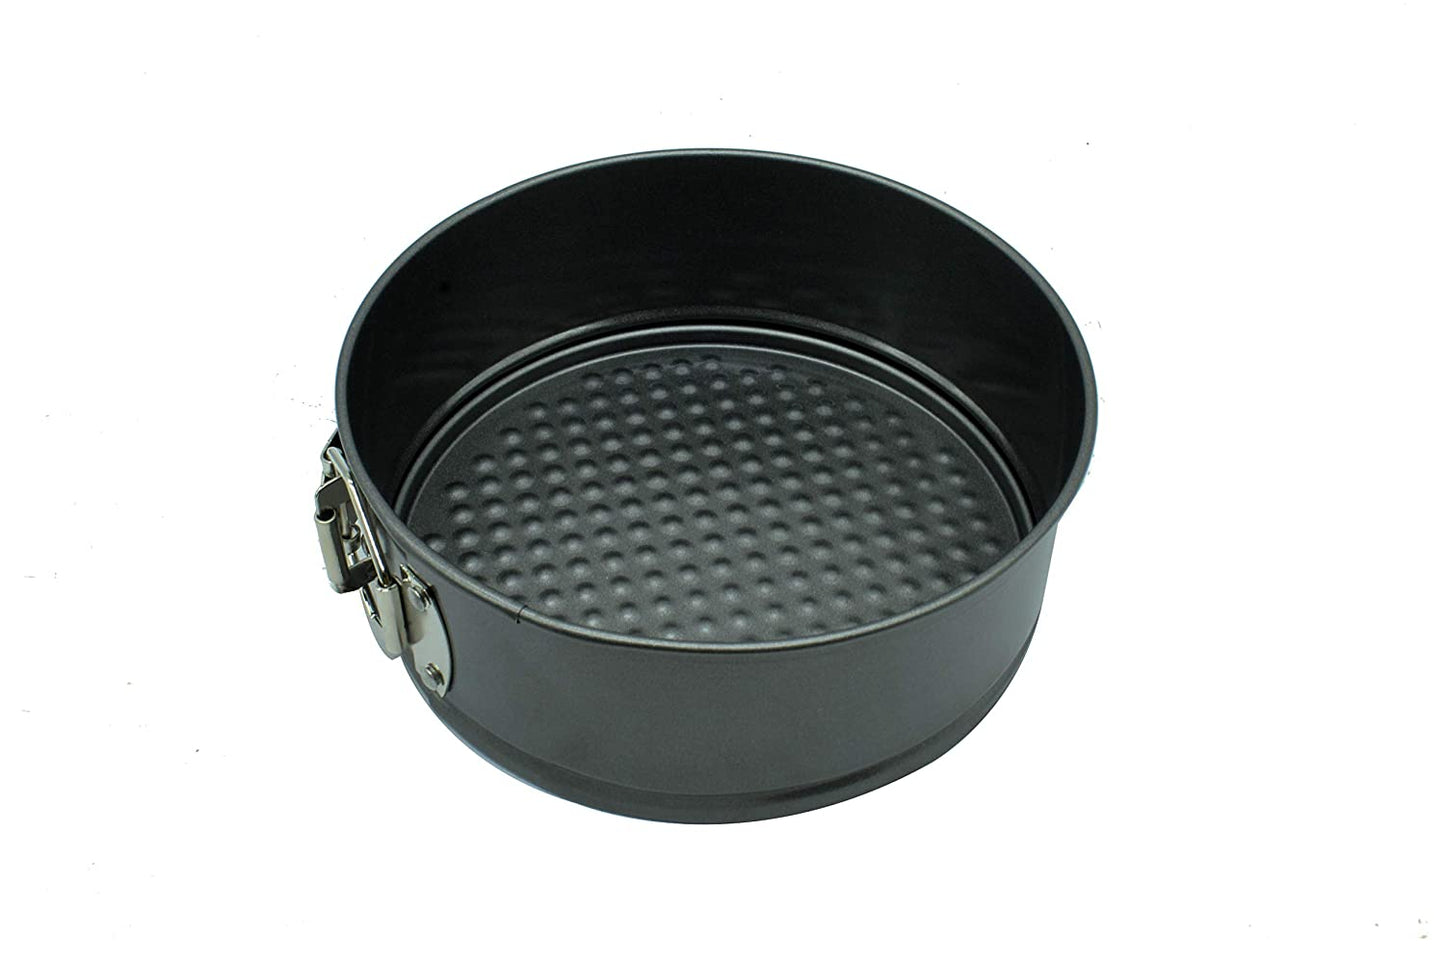 Carbon Steel Round Shape Cake Mould | Baking Pan (Size No. : 1)